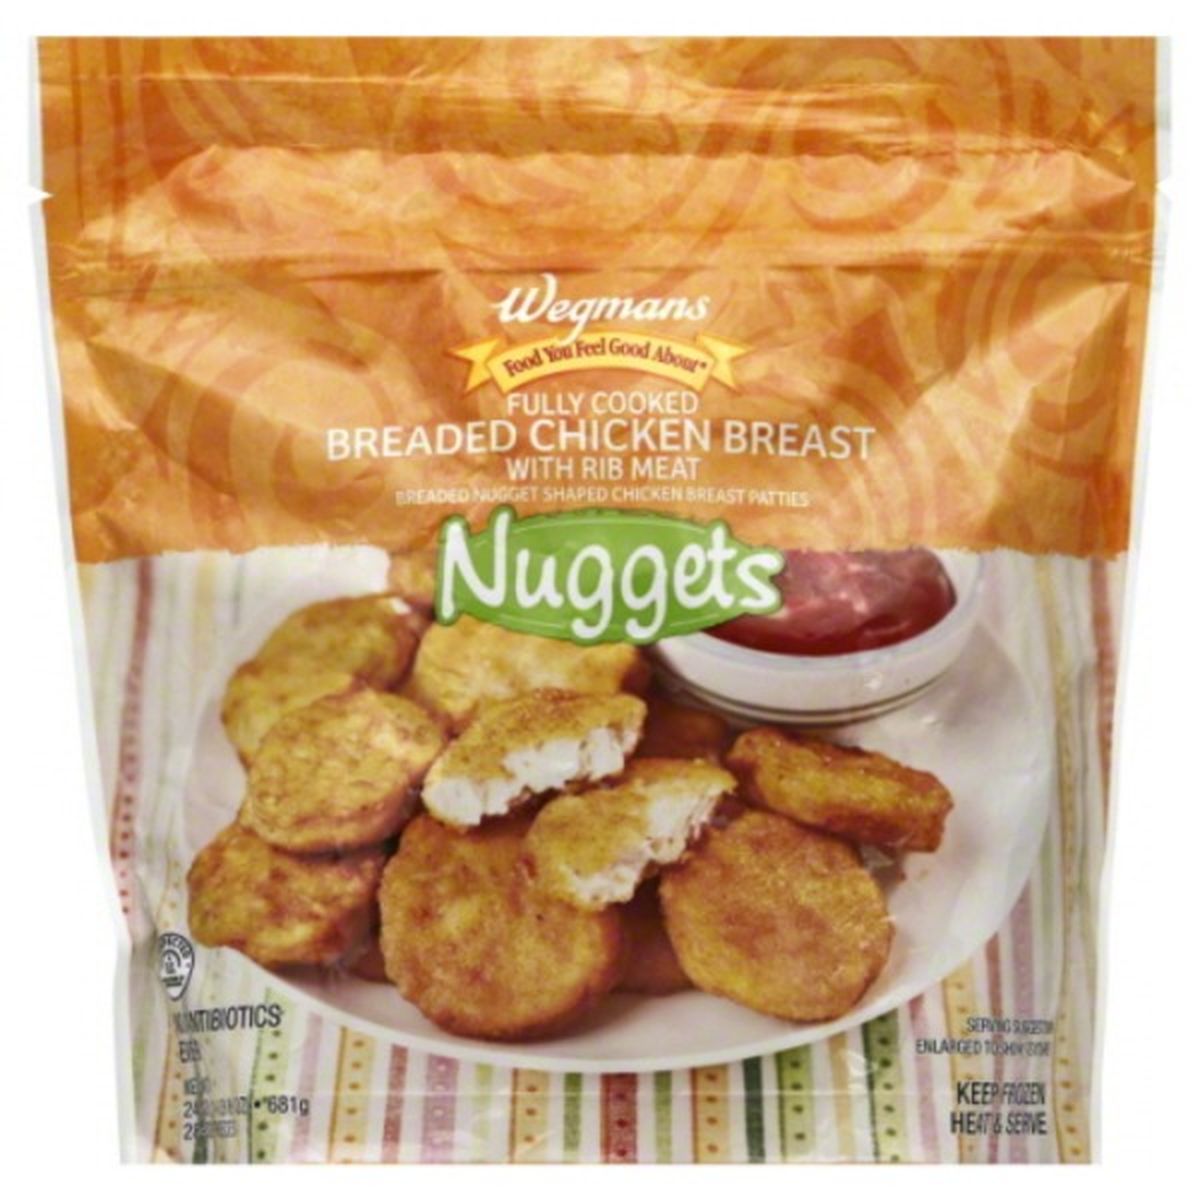 Calories in Wegmans Frozen Fully Cooked Chicken Breast Nuggets